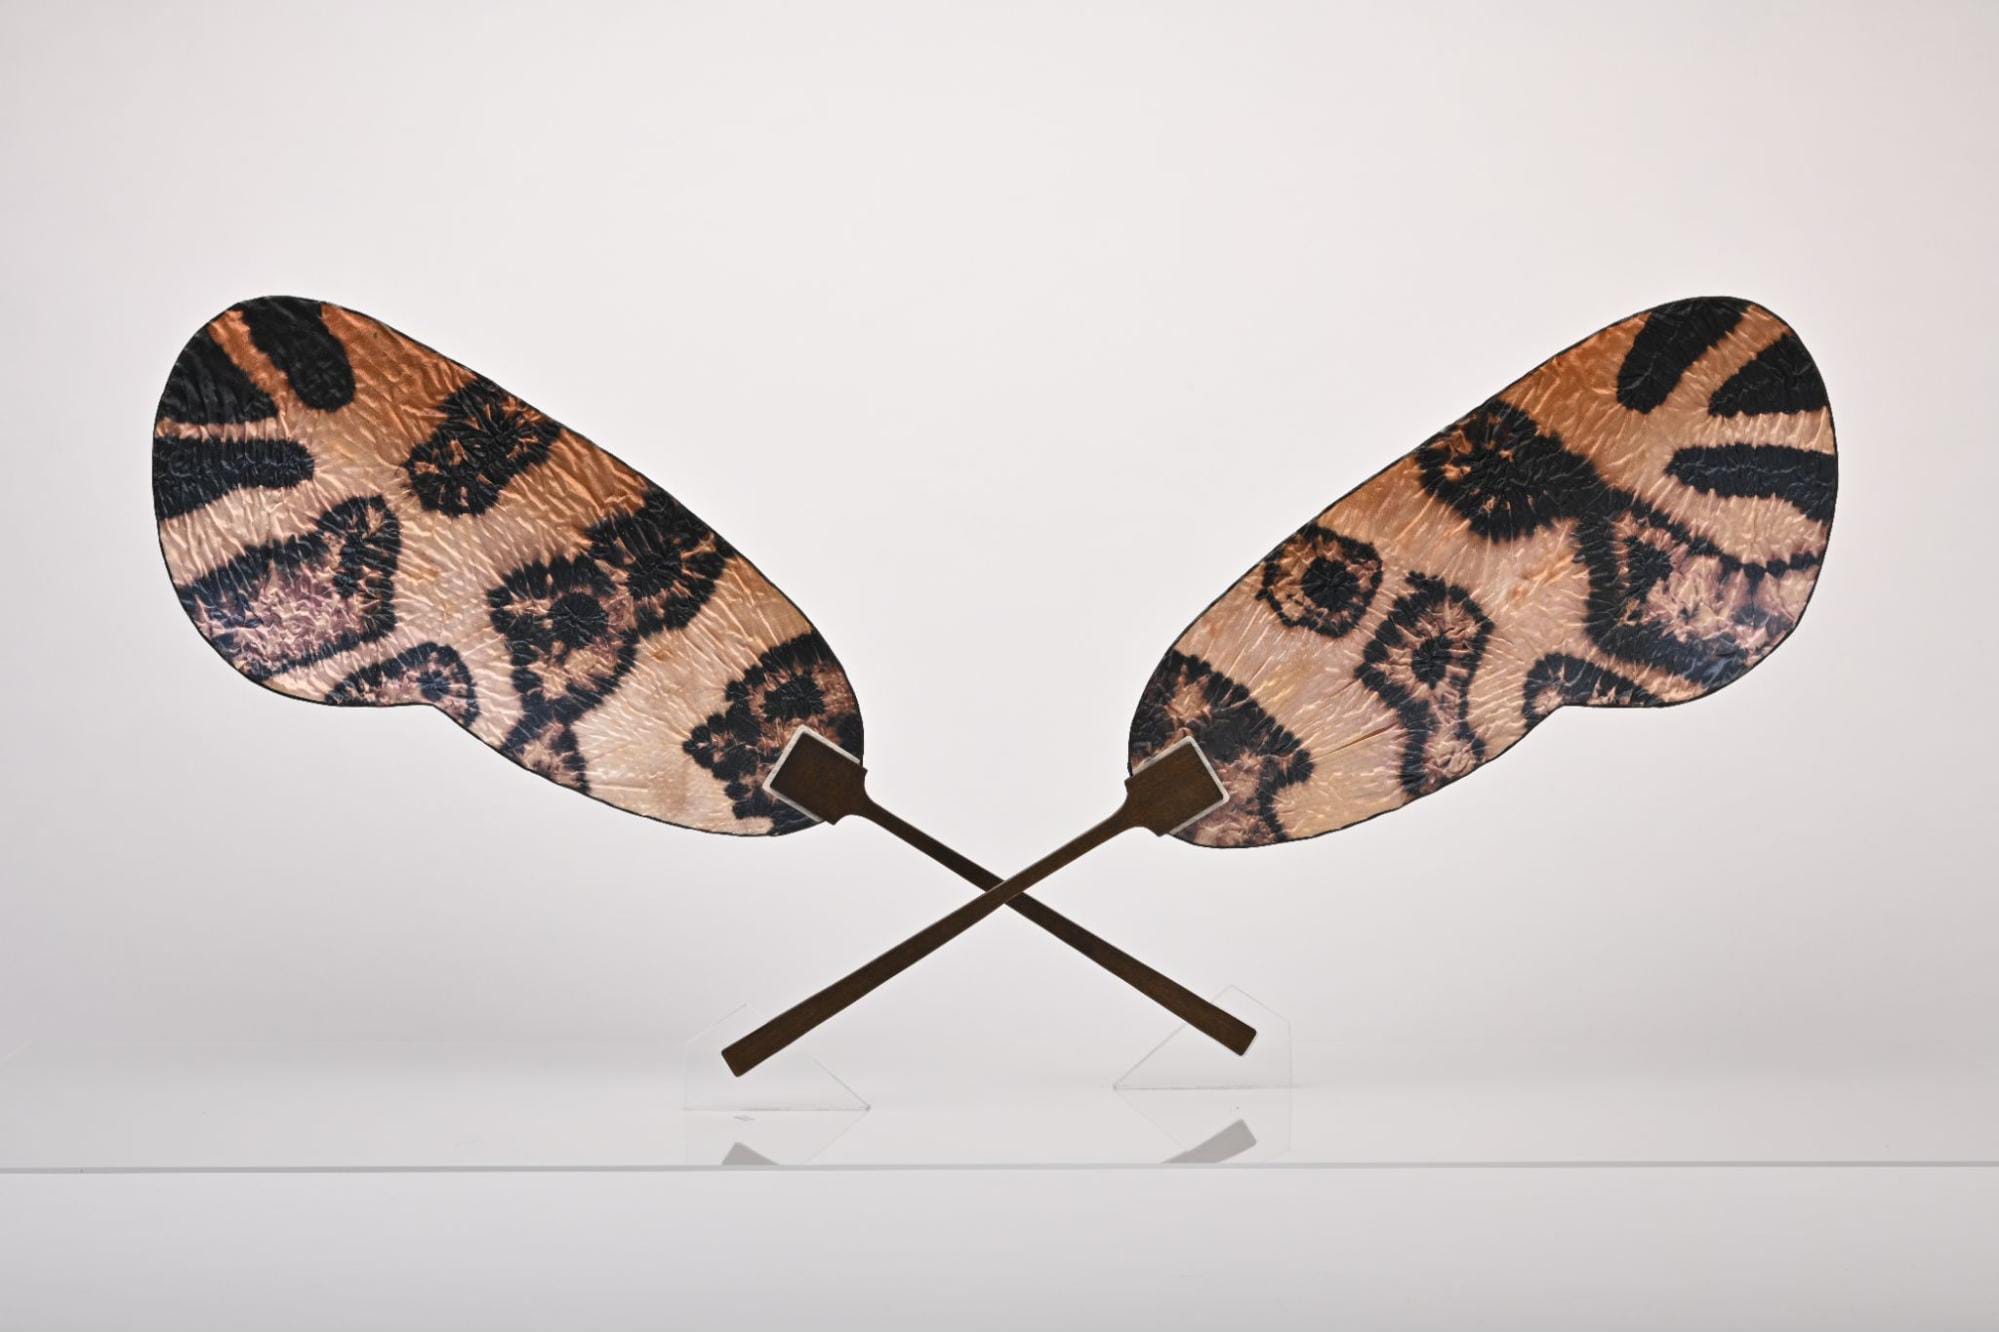 Shibori round fan with wing pattern of the bagworm moth